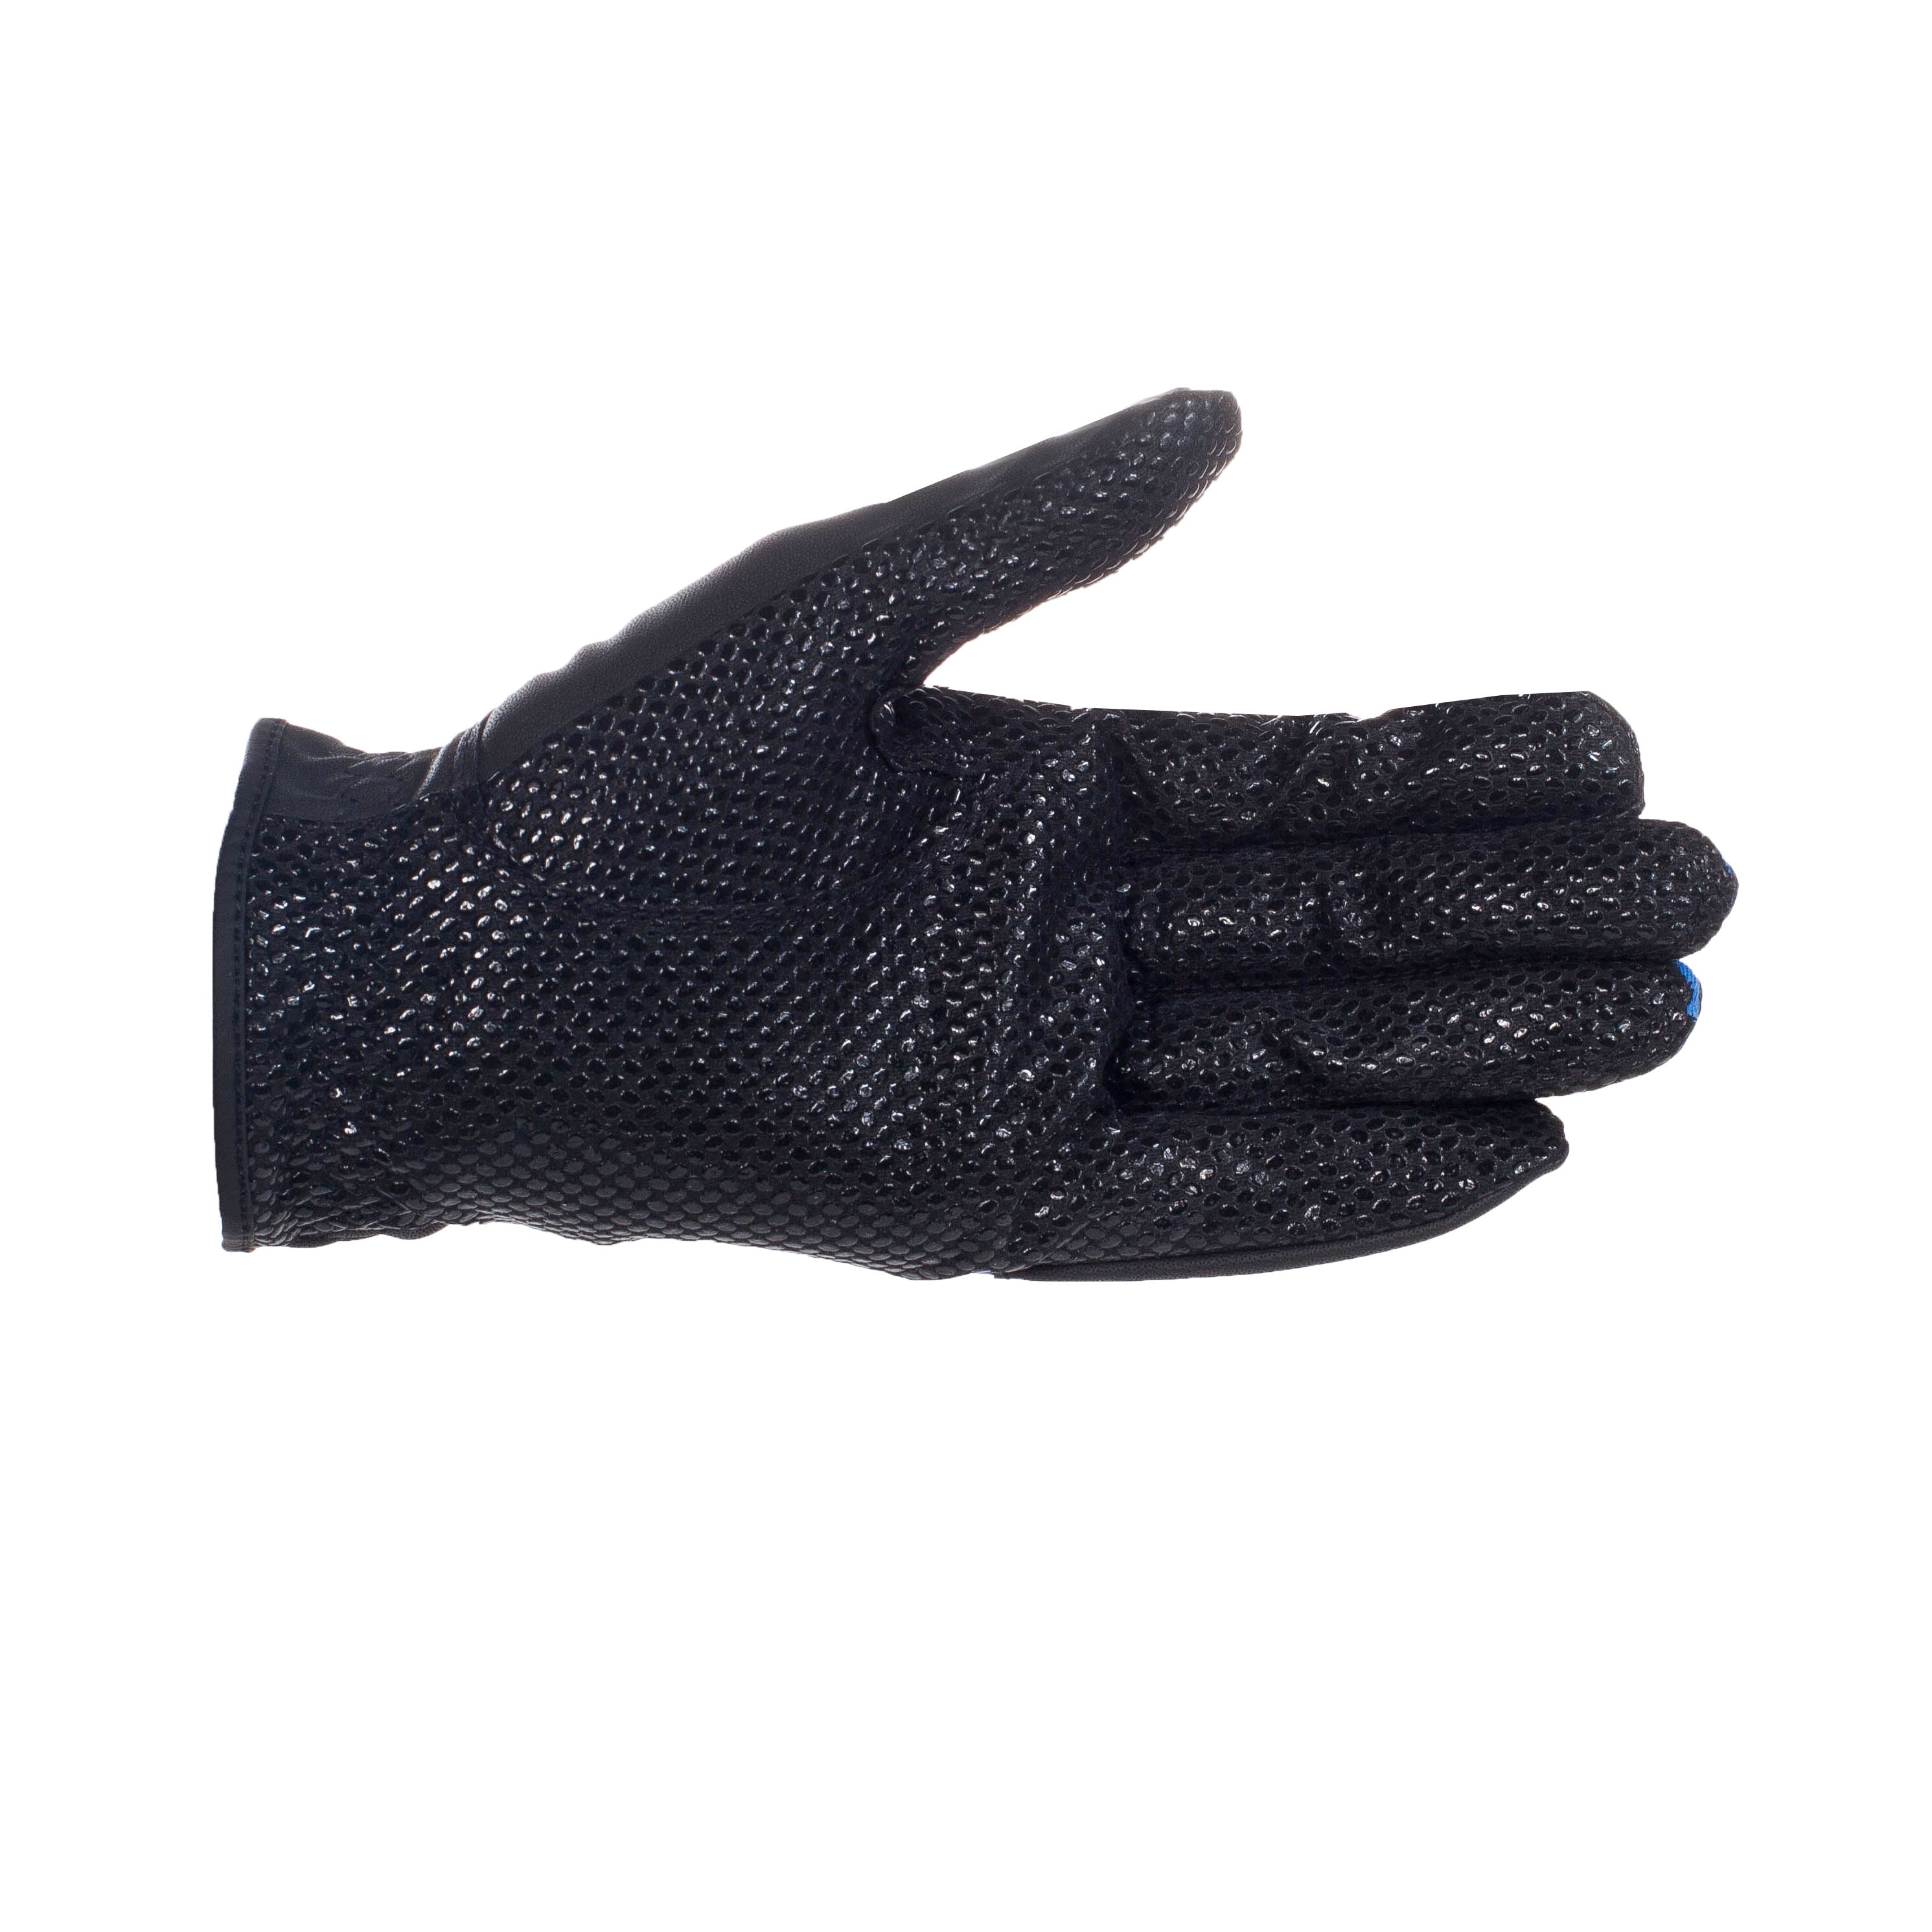 TKO Synthetic Leather Race Gloves with silicone palm Extra Grip